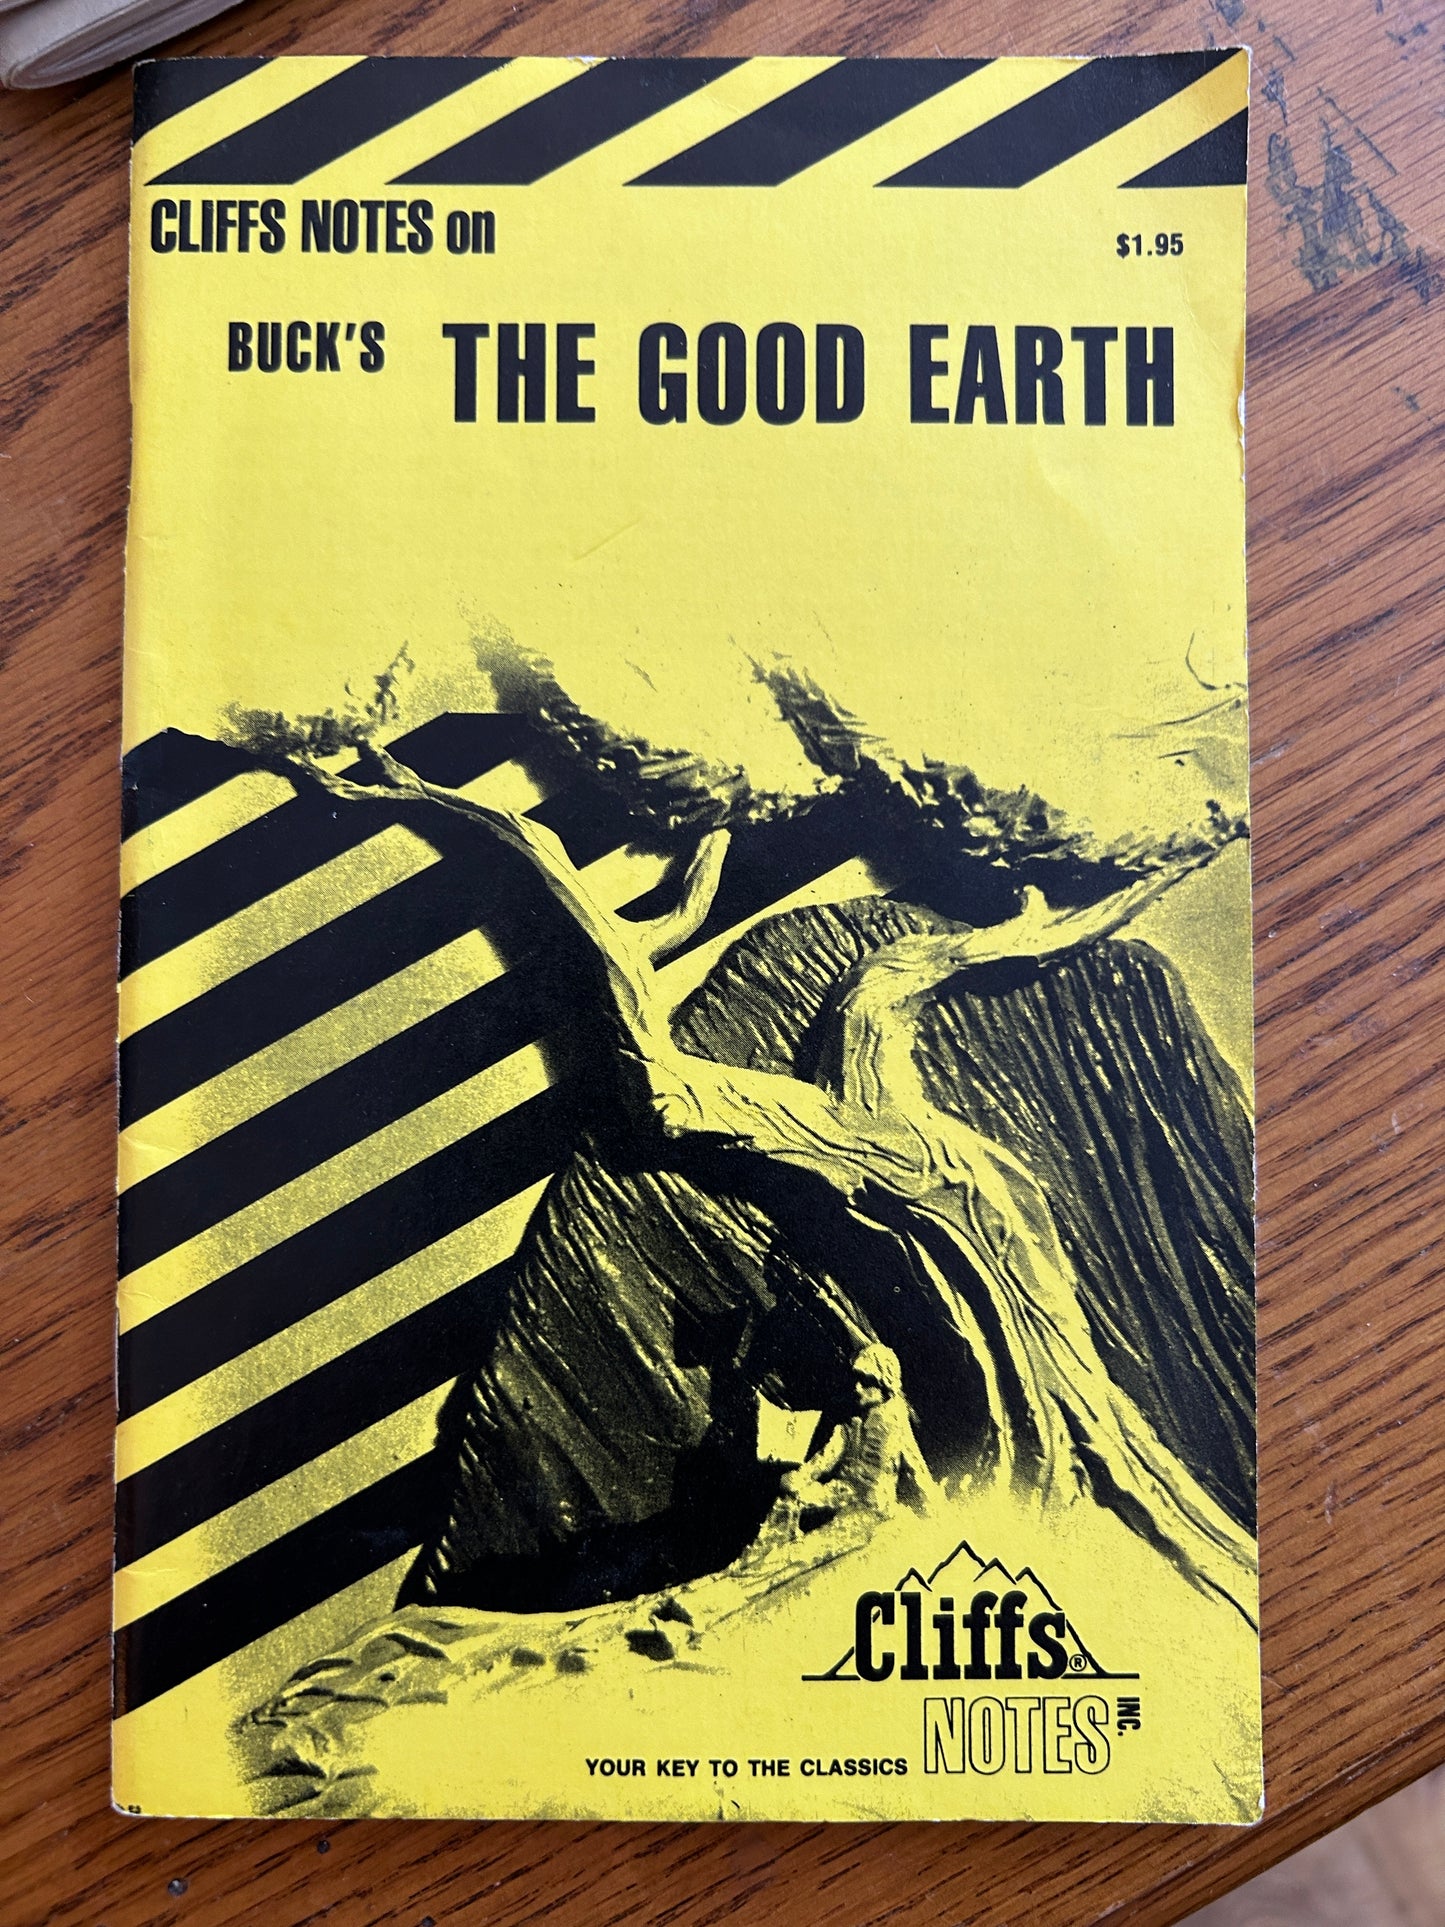 The Good Earth (Cliffs Notes) Reissue Edition by Stephen Veo Huntley (Author)